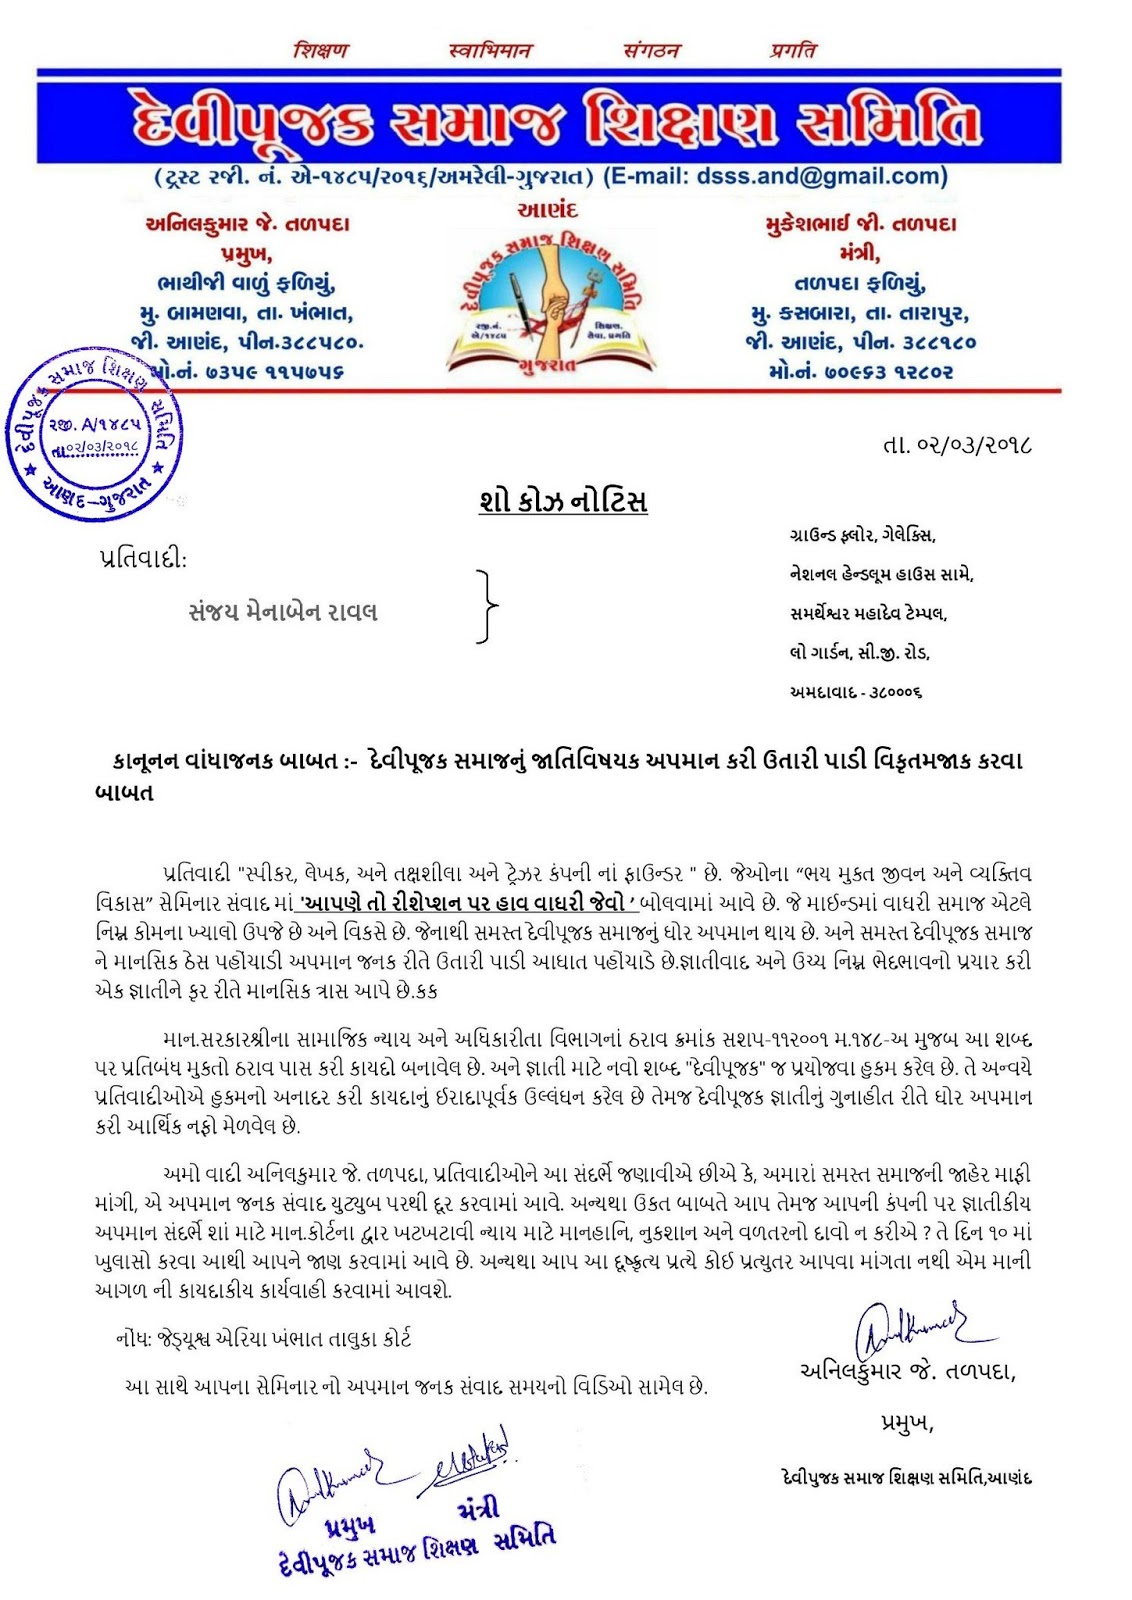 DSSS Issued Notice To Sanjay Raval